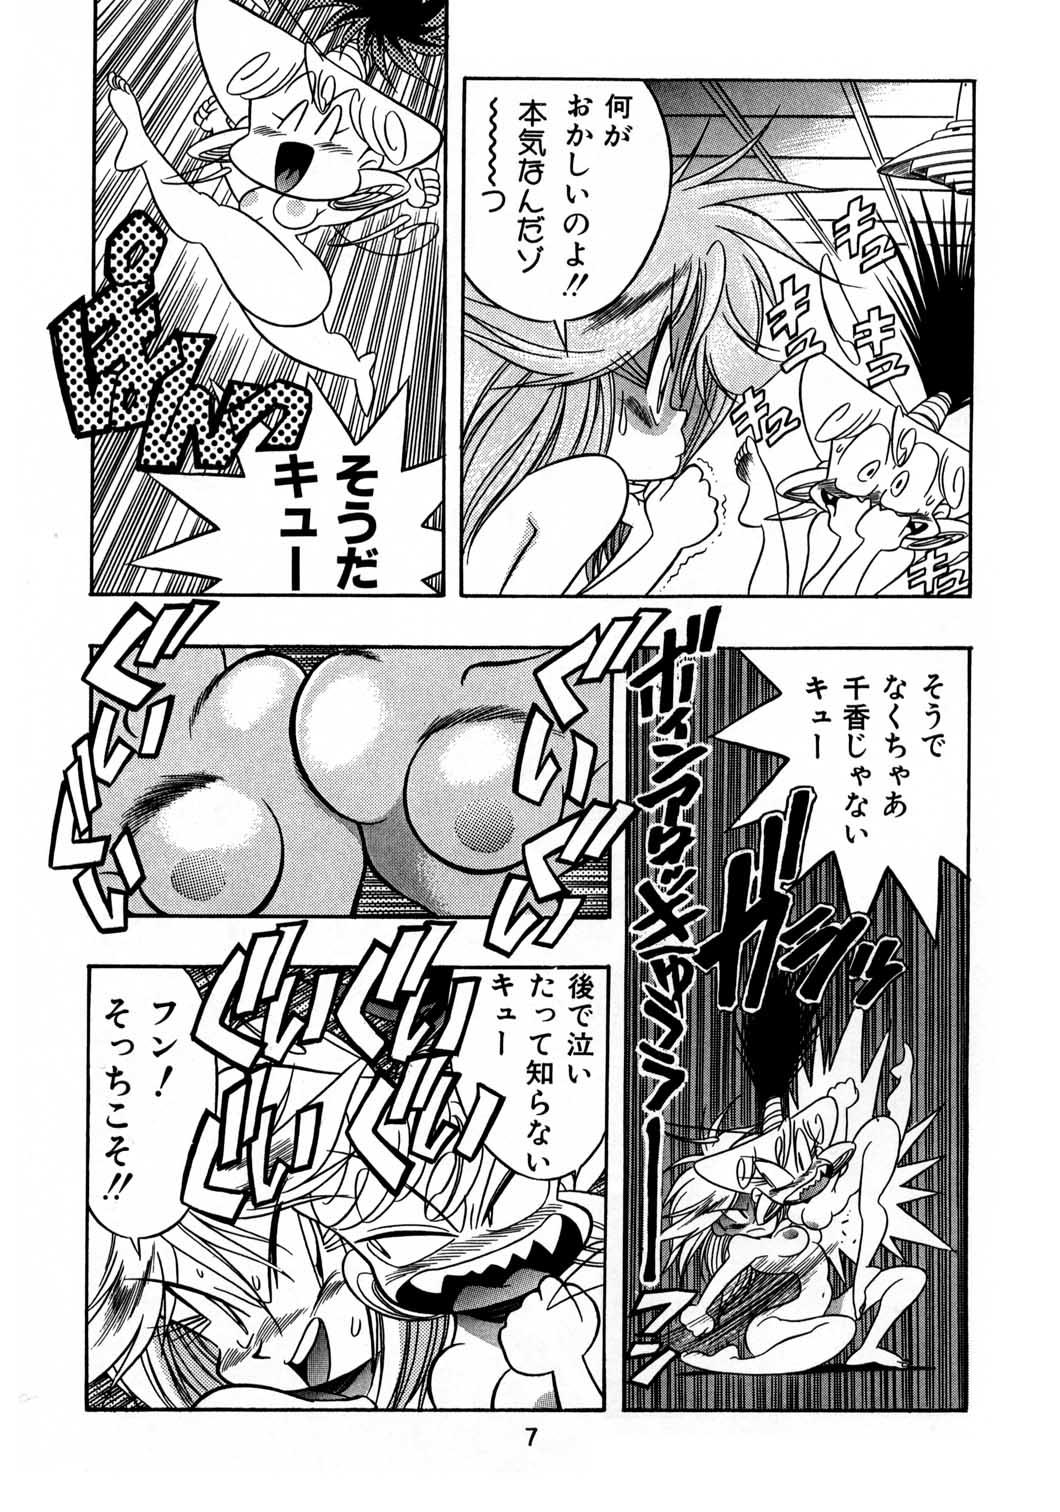 Hot Girls Getting Fucked Henreikai Special Vol. 8 - Macross 7 Wives - Page 6